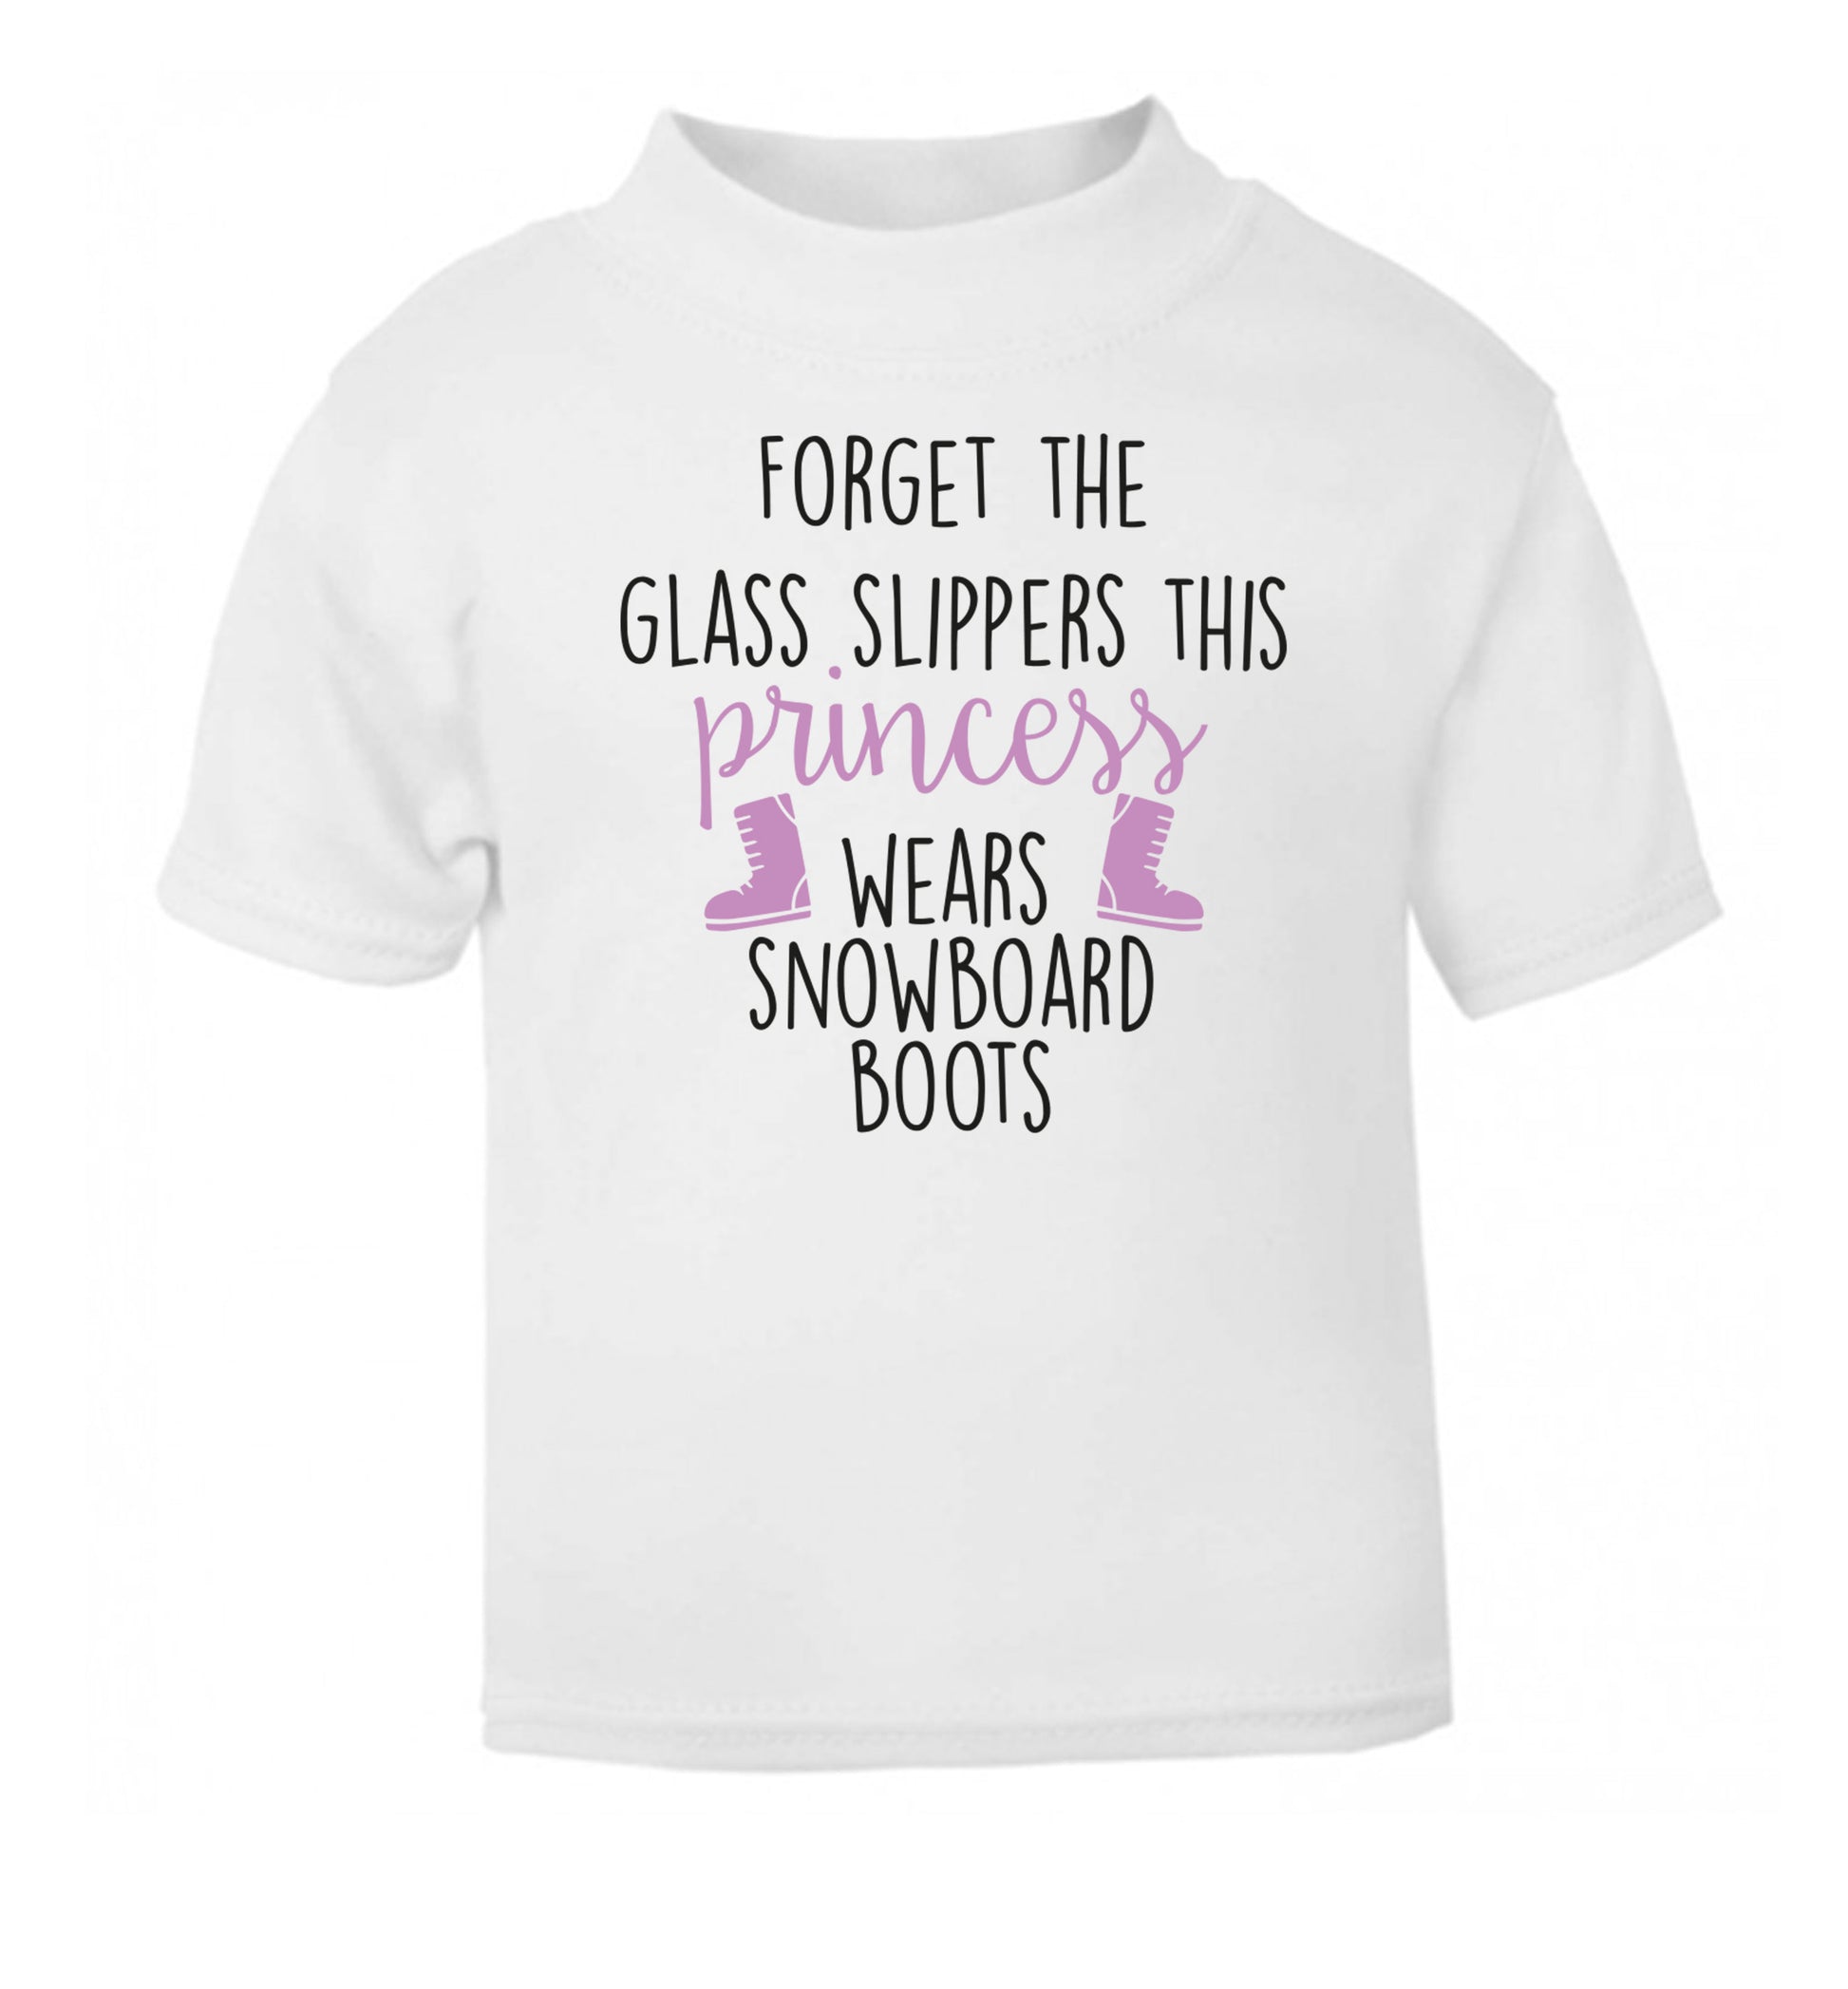 Forget the glass slippers this princess wears snowboard boots white Baby Toddler Tshirt 2 Years